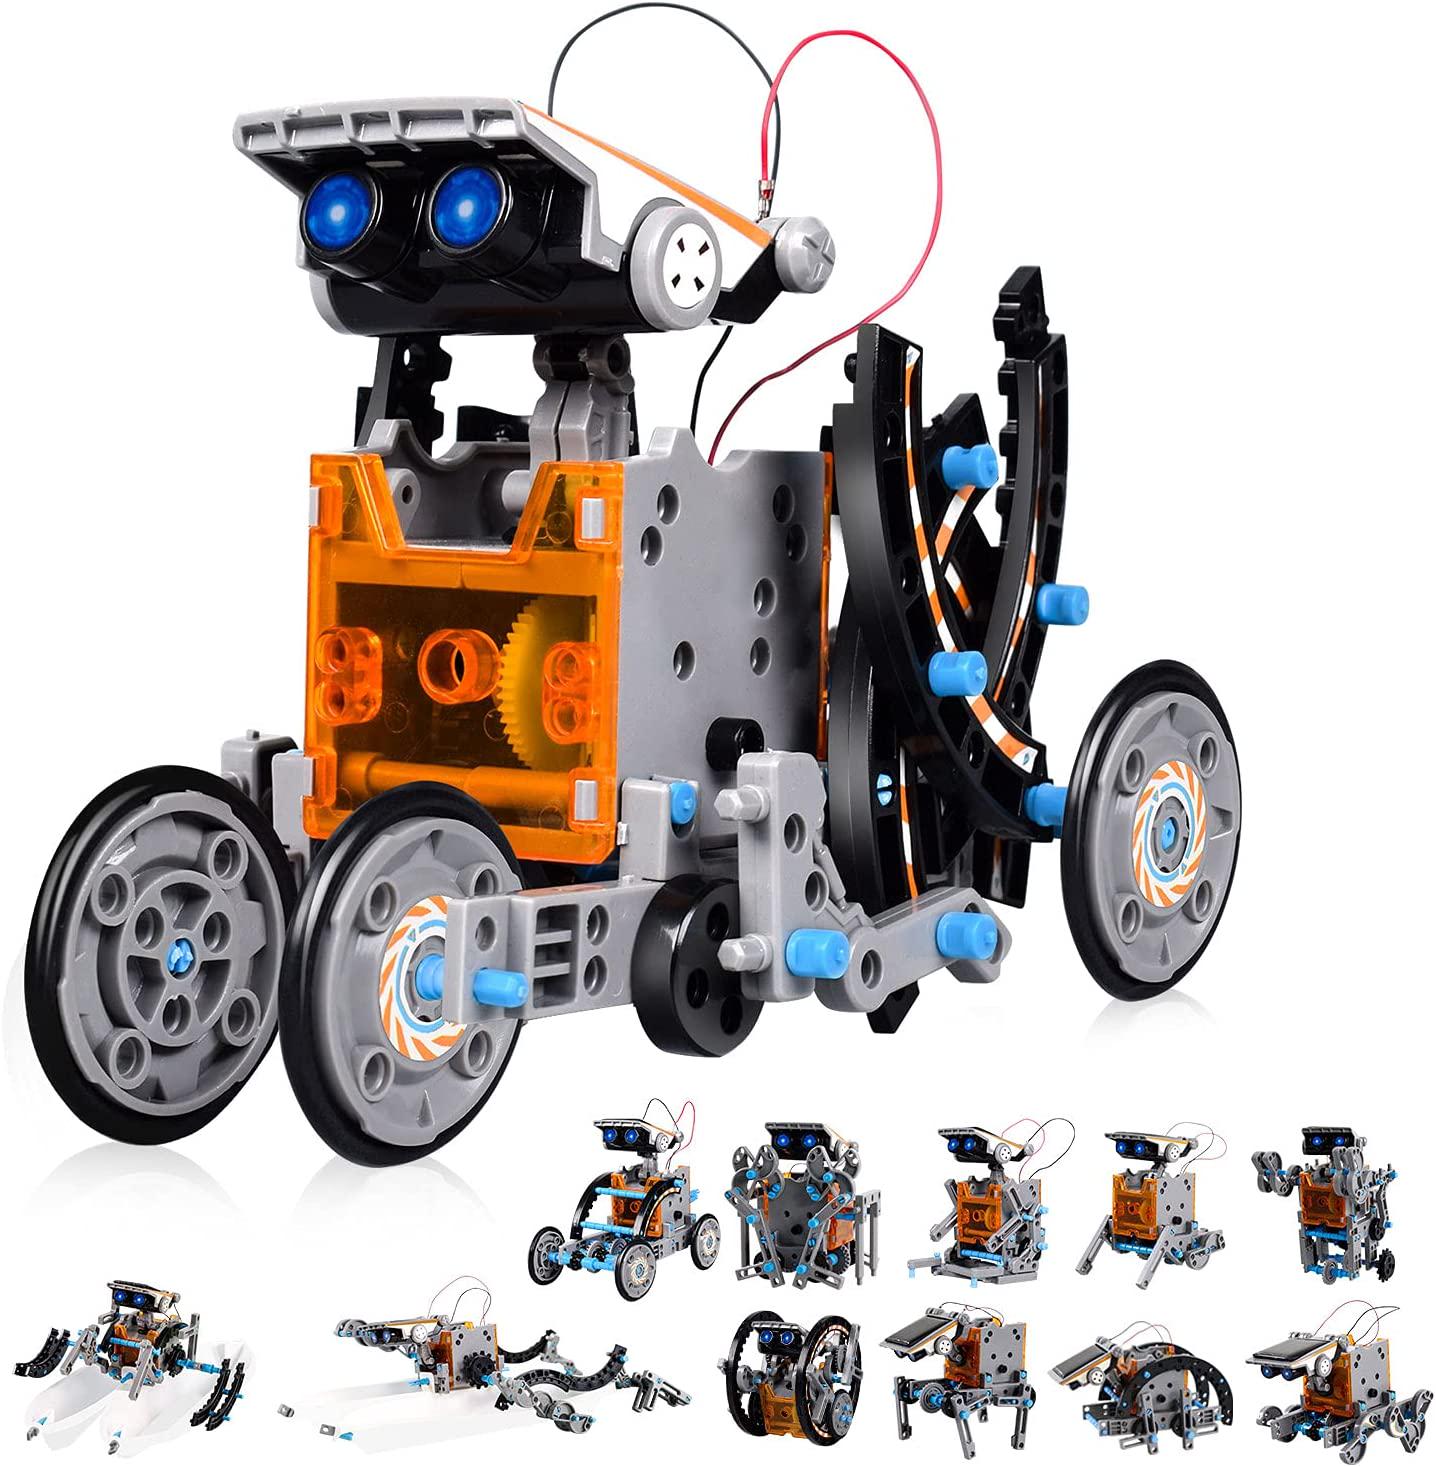 LQYoyz, LQYoyz Solar Robot Kit 12-in-1 STEM Projects Robot Kit - 190 Pieces, Fine Motor Skills Toys Gifts for 7 8 9 10 Year Old Boys, Education Science Experiment Puzzle Kit for Kids Aged 8-12 and Older